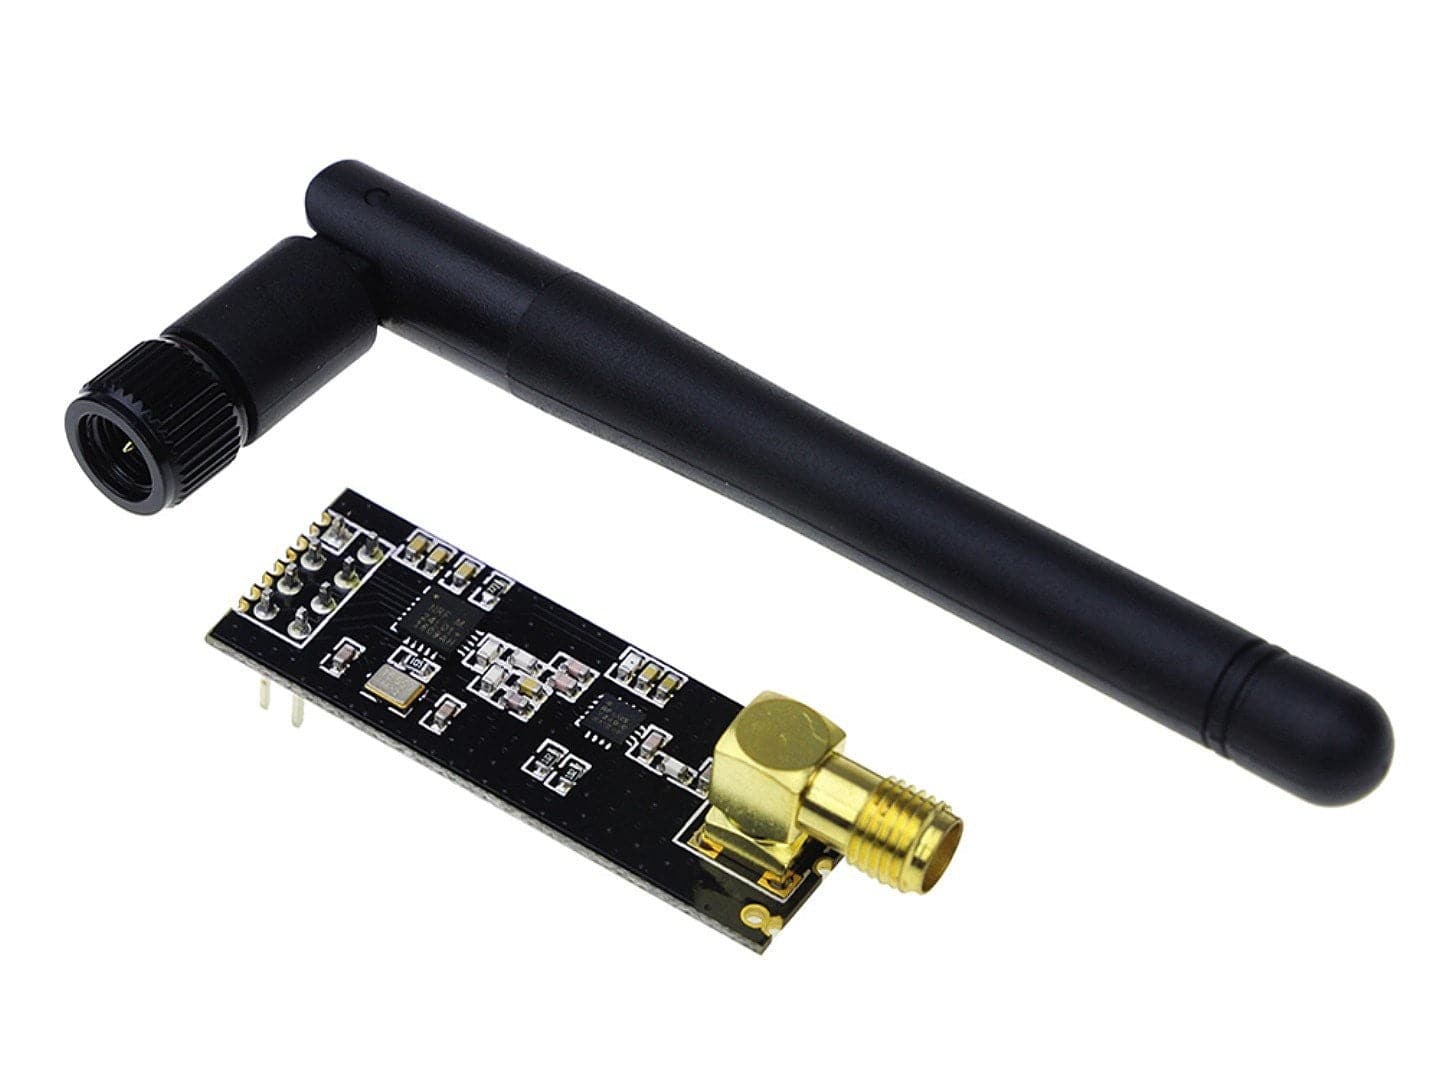 NRF24L01+PA+LNA 1100 Meter Long Distance Wireless Module With Antenna - AA102 - REES52